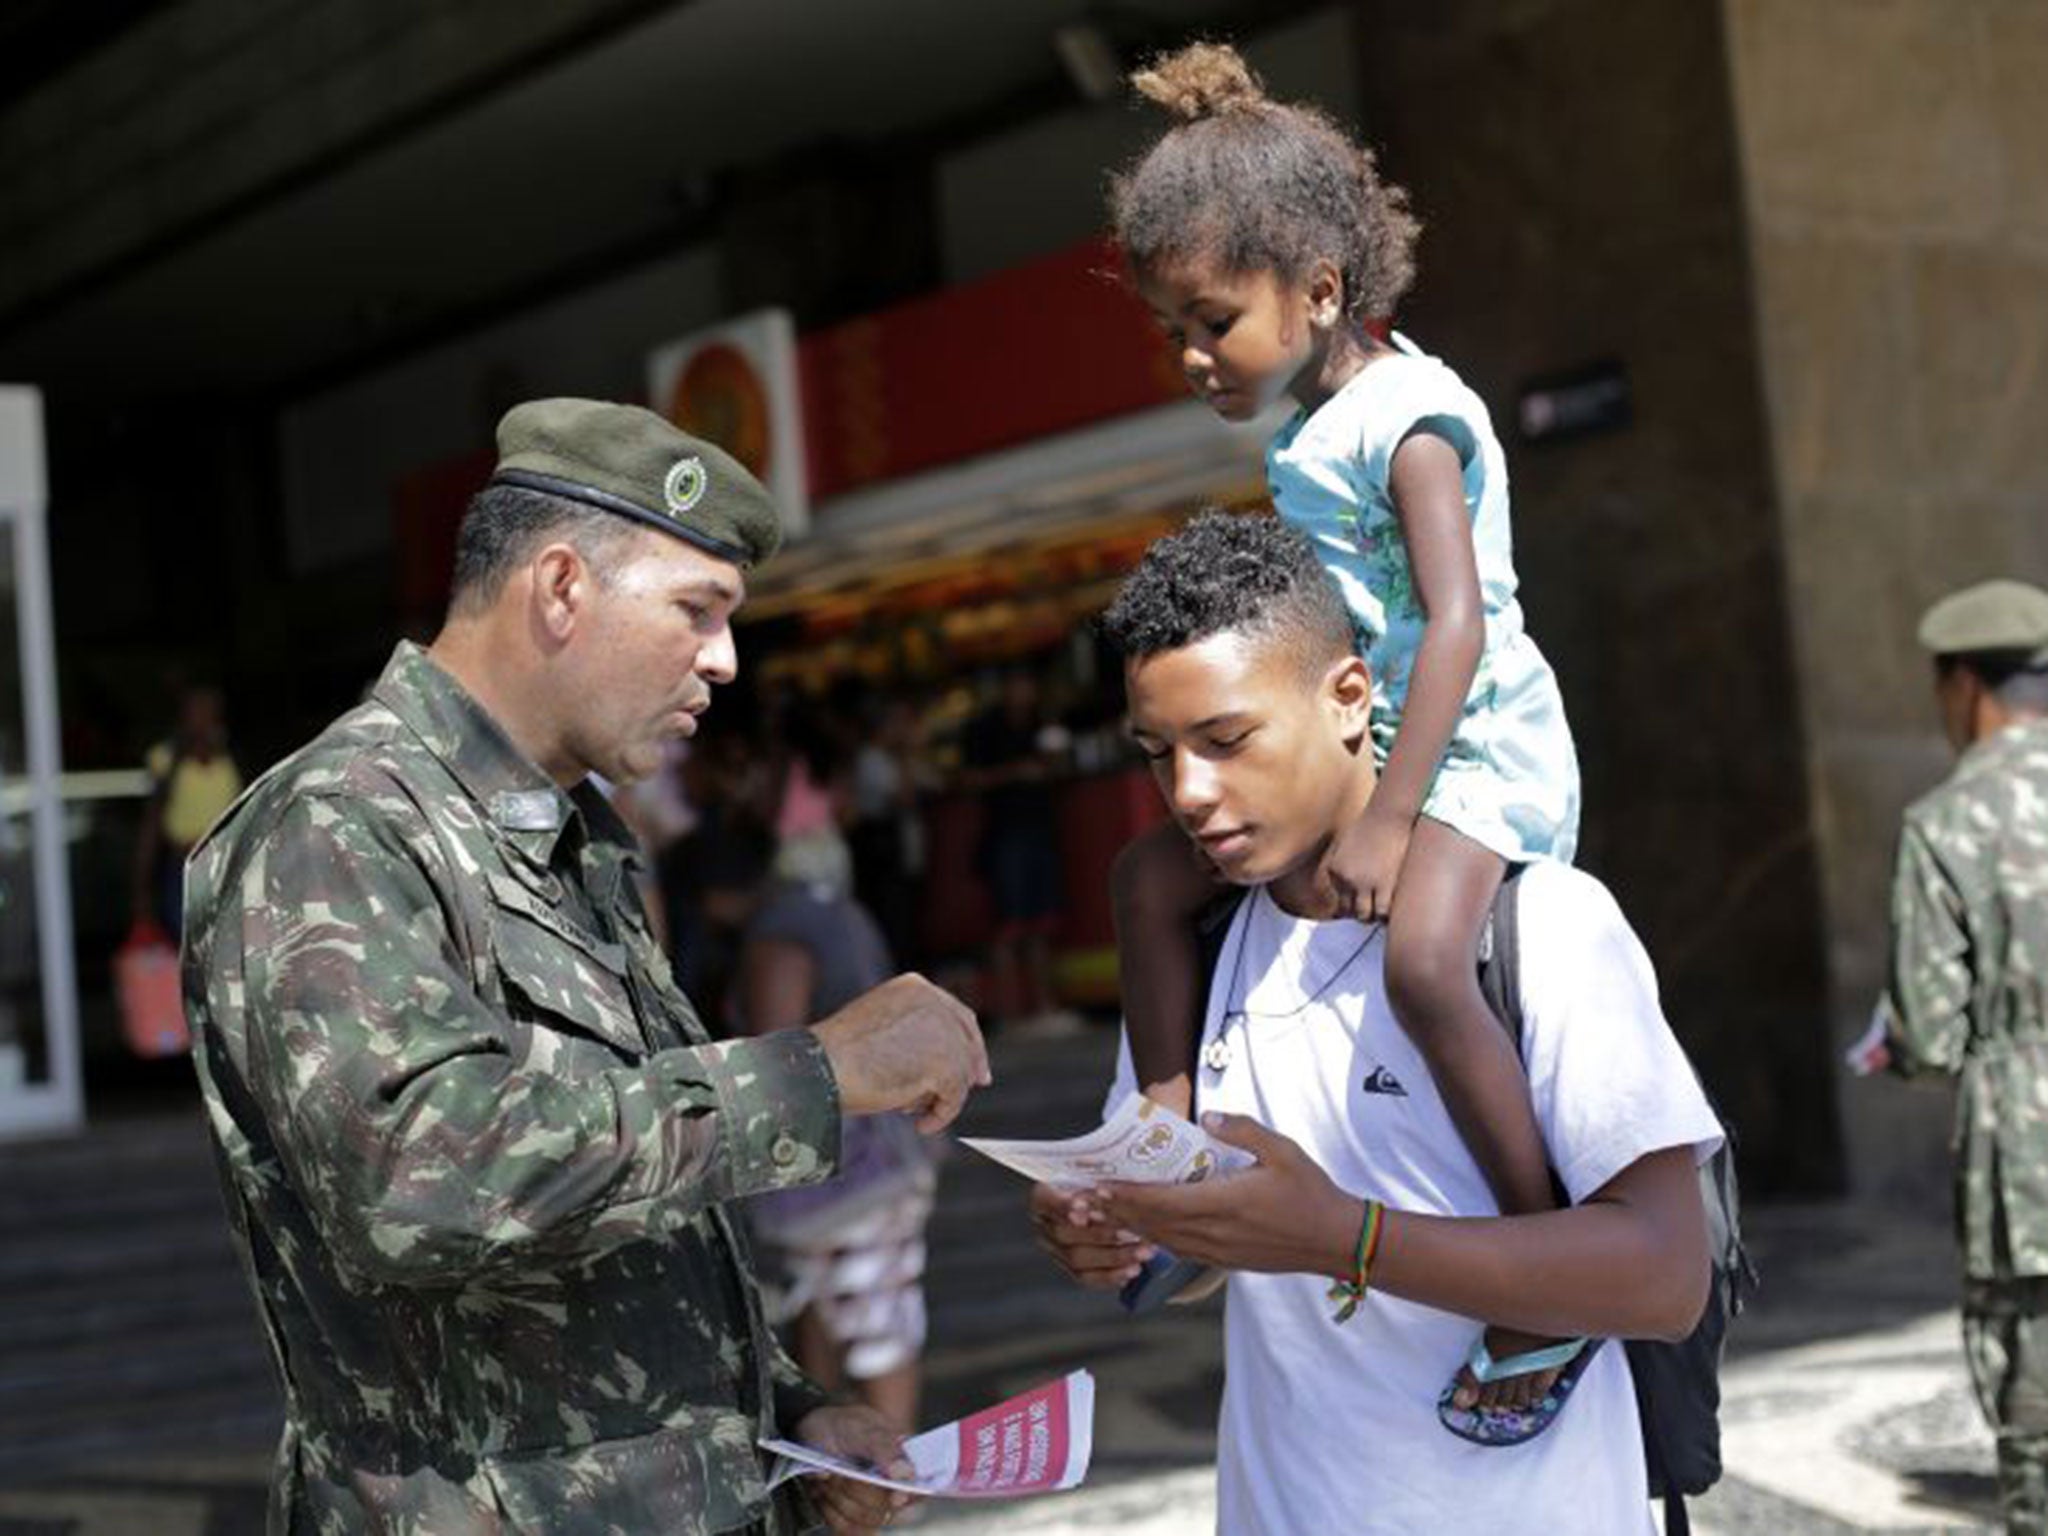 Members of the armed forces hand out leaflets on the Zika virus